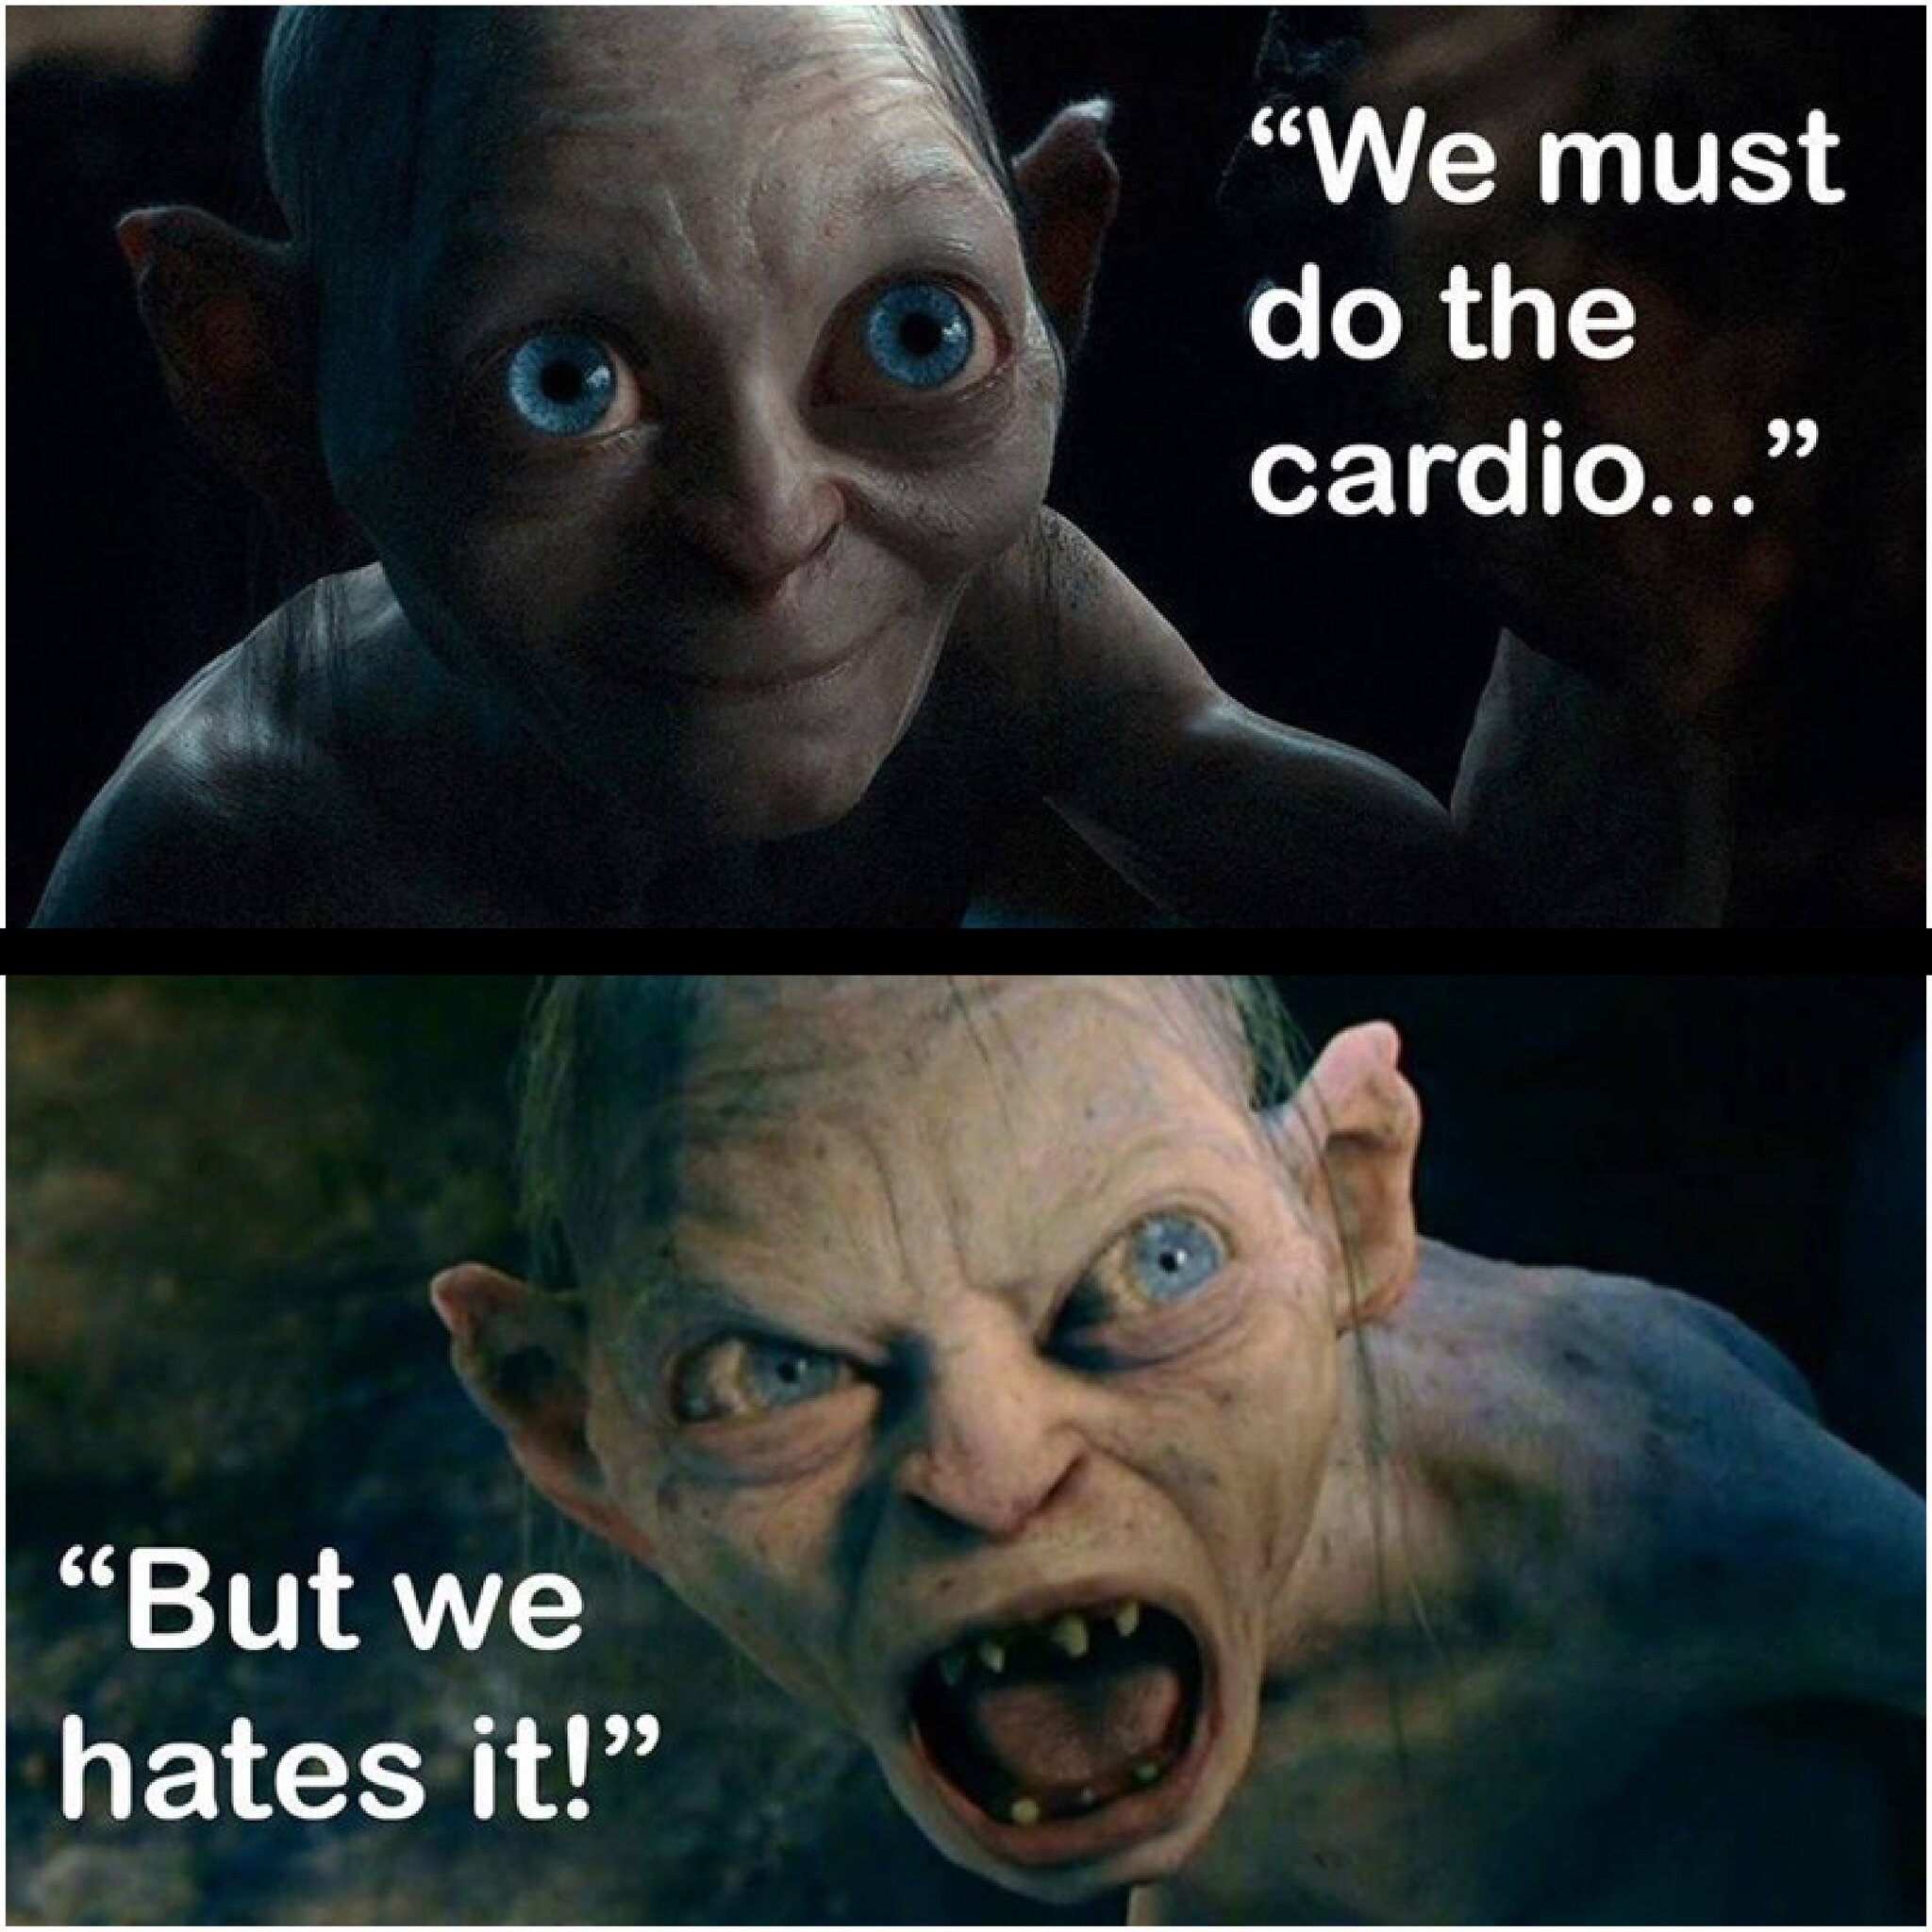 On a scale of 1-10, cardio gets a -3 🤣

For any of you beasts who actually ENJOY it, please let us in on your secret!

Send this to someone who hates cardio as much as you do 😩

#cardio #revitalizefitness #419gyms #gymmemes #ohiogyms #lordofthering